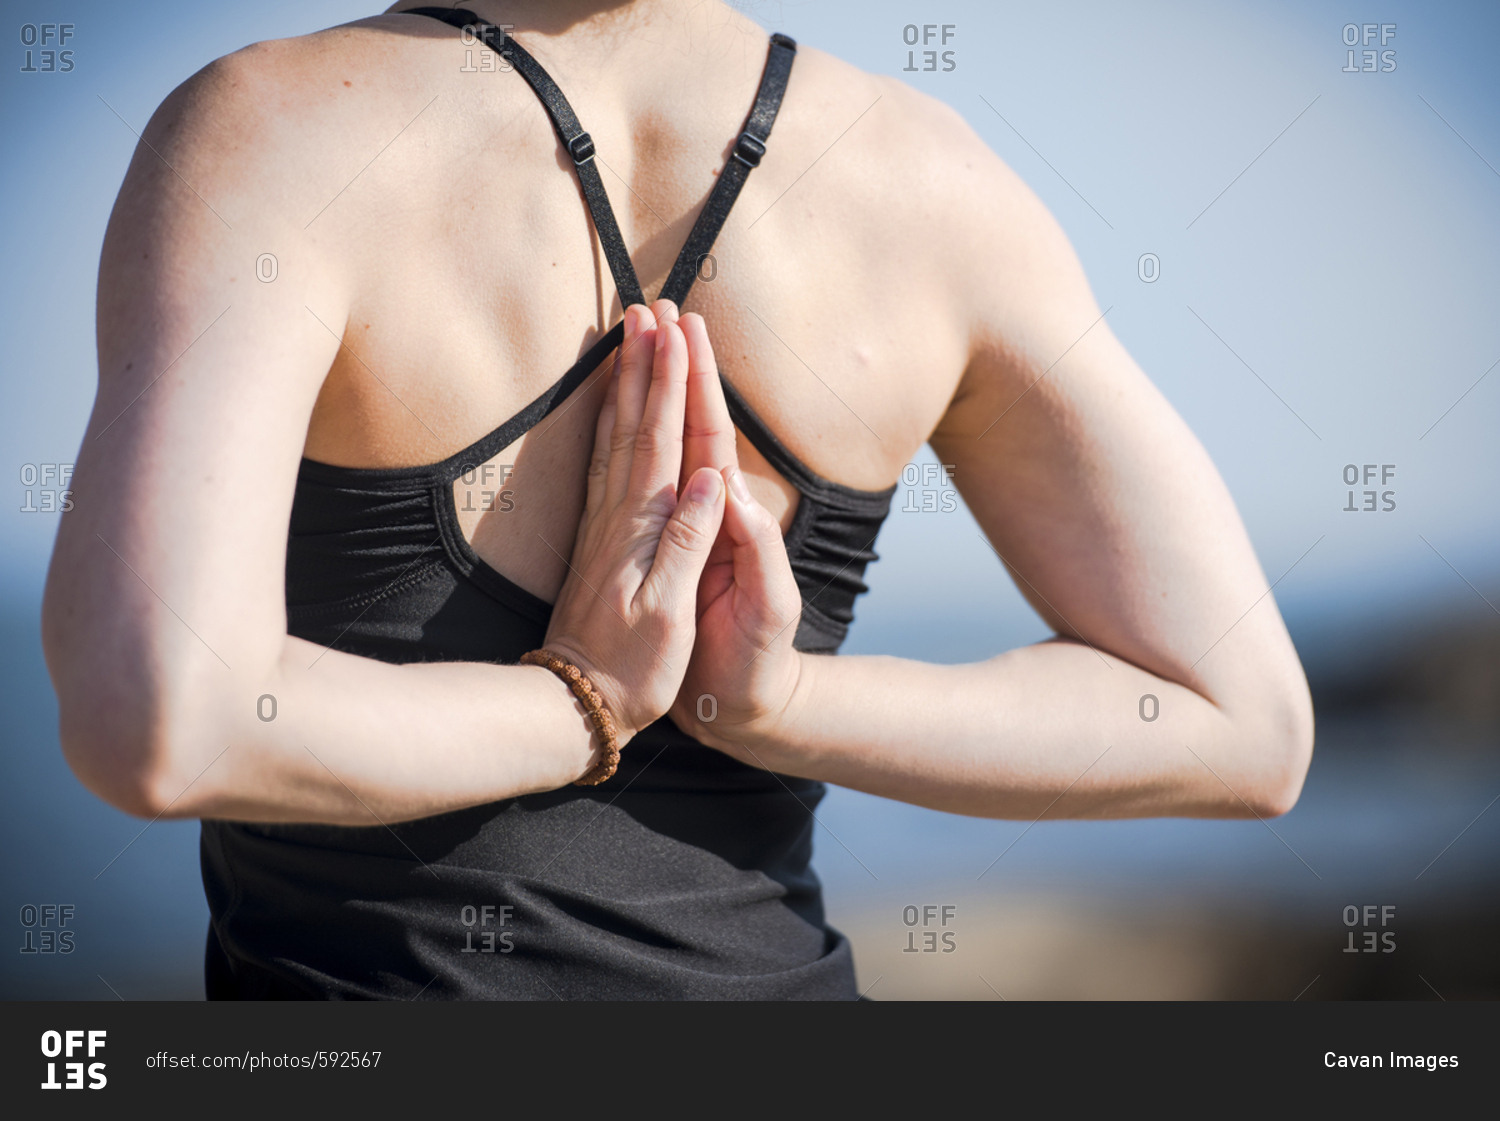 Midsection rear view of woman performing reverse prayer position